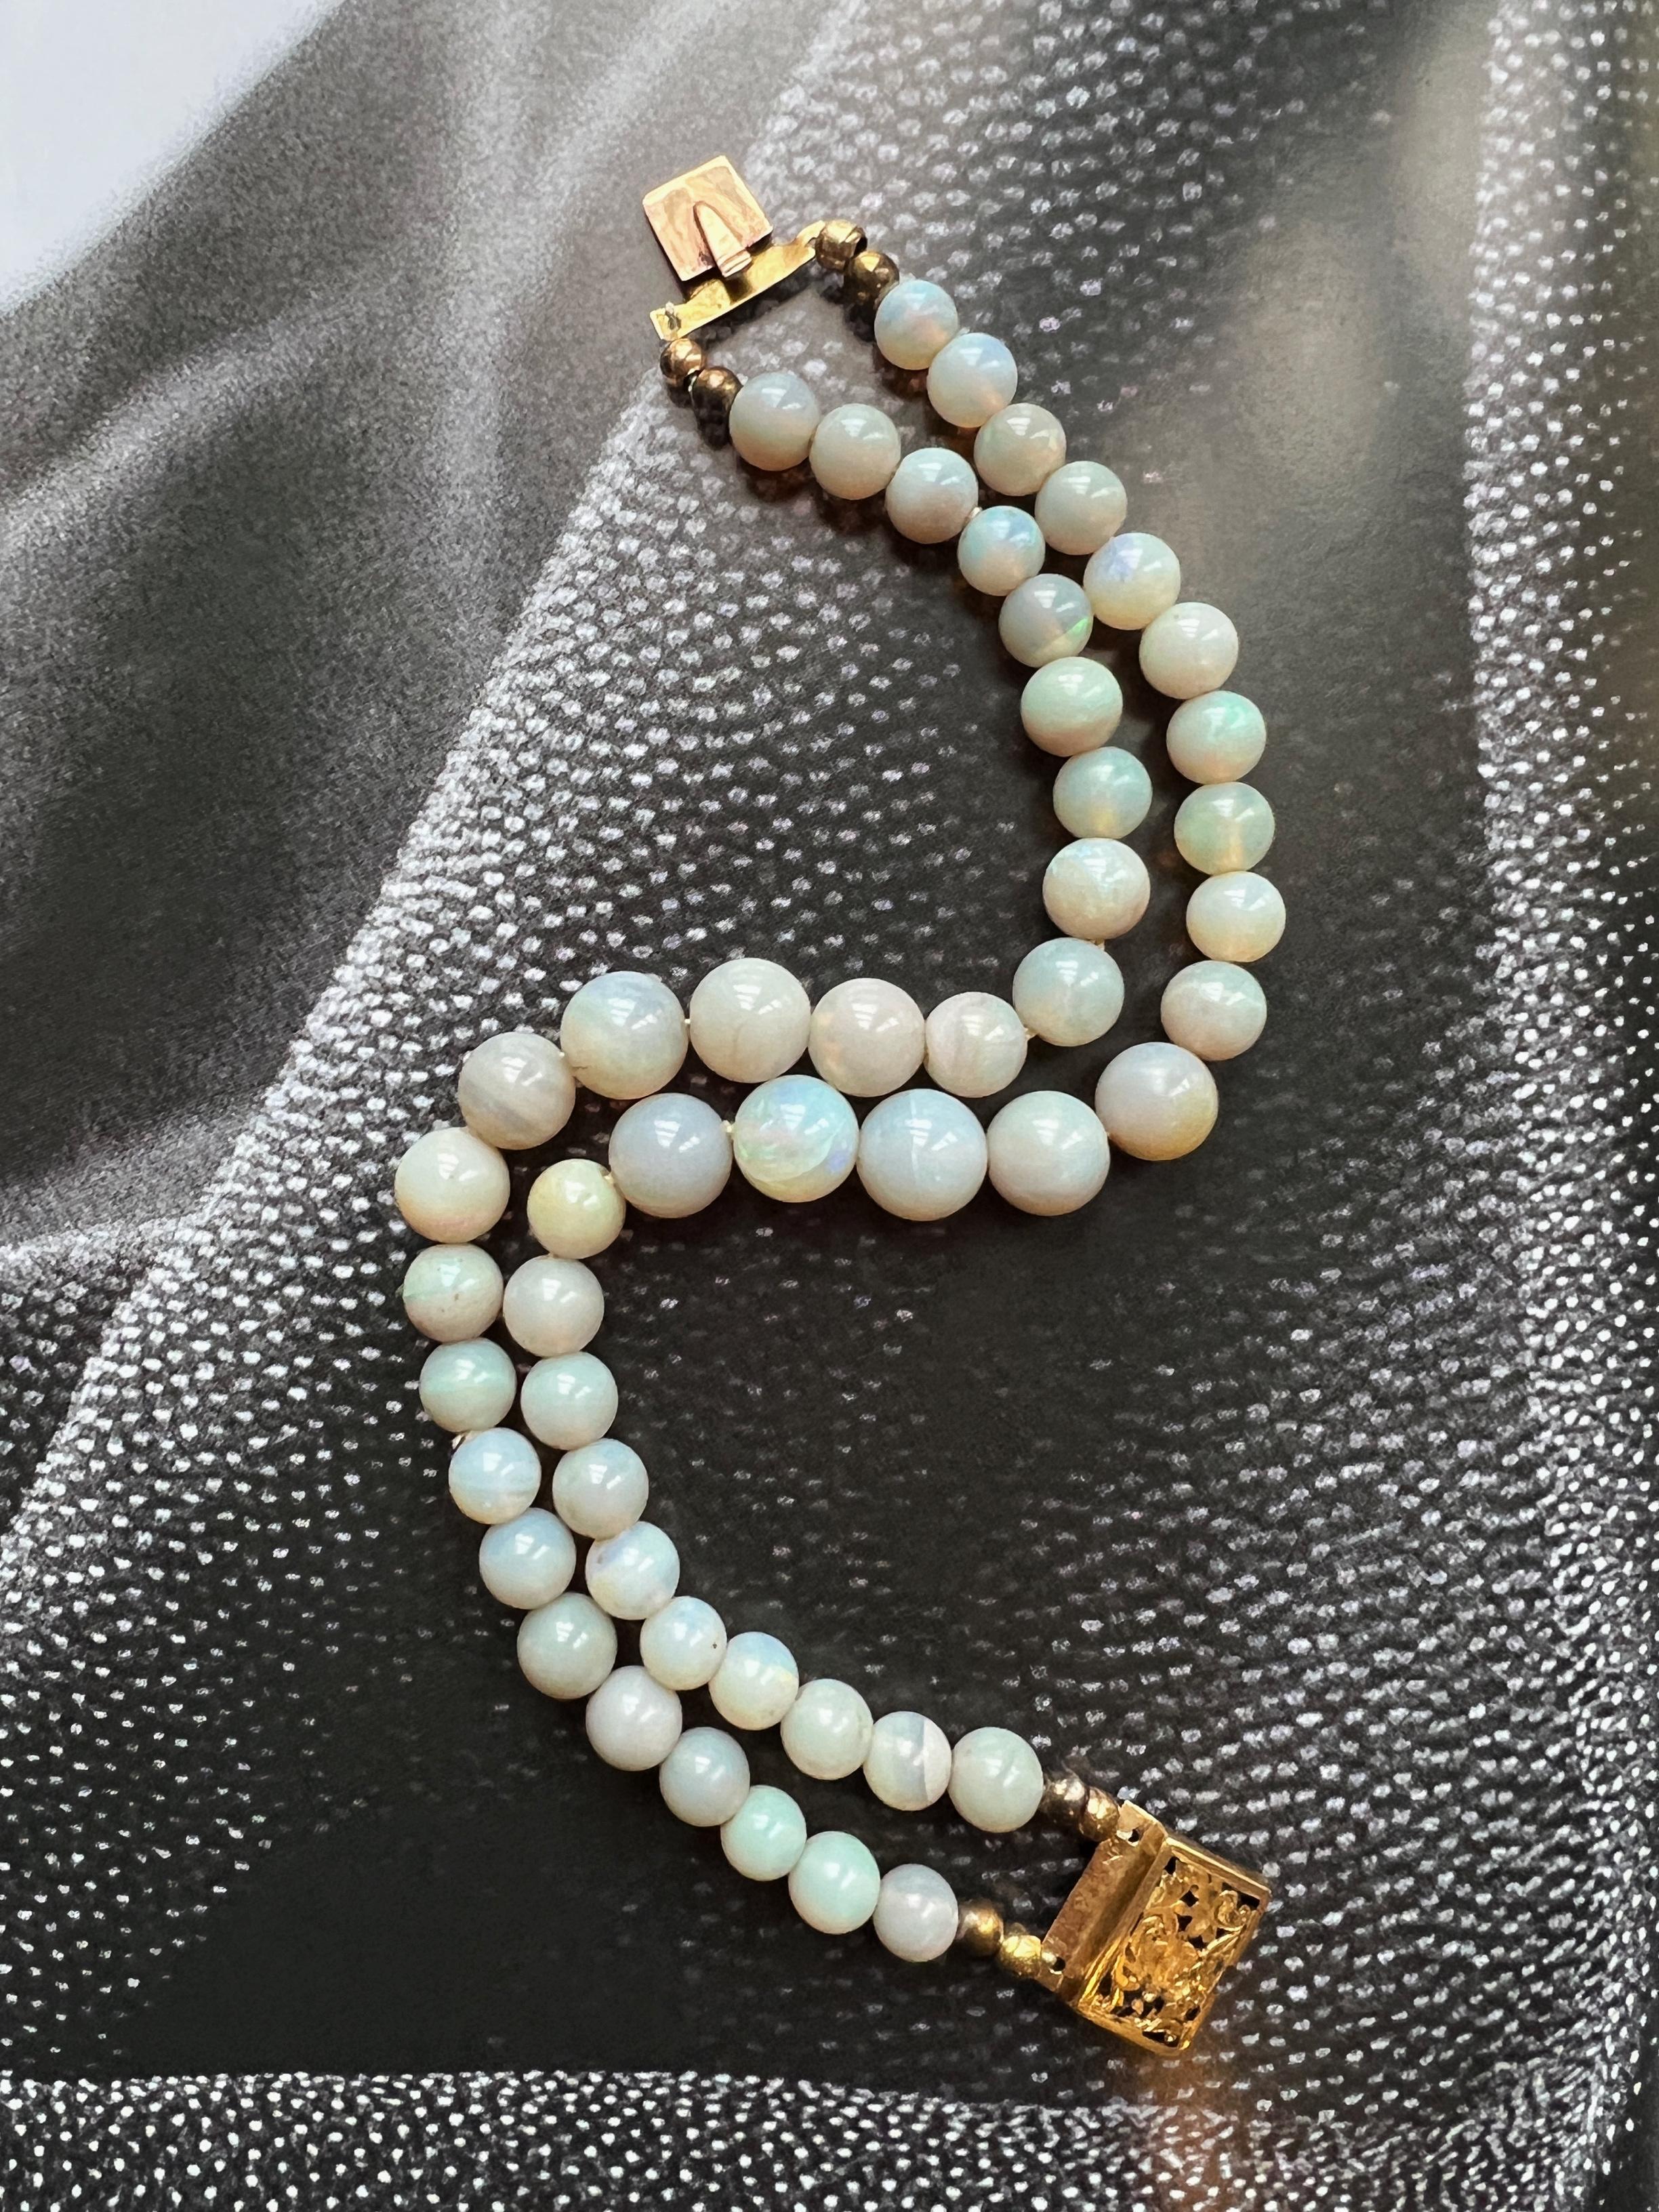 Stackable, sunshine-bright and rare to find, that’s what we love in this French made antique opal bracelet.

We have seen antique opal rings and pendants but it is not usual to find an opal bracelet especially in this size and design. The bracelet